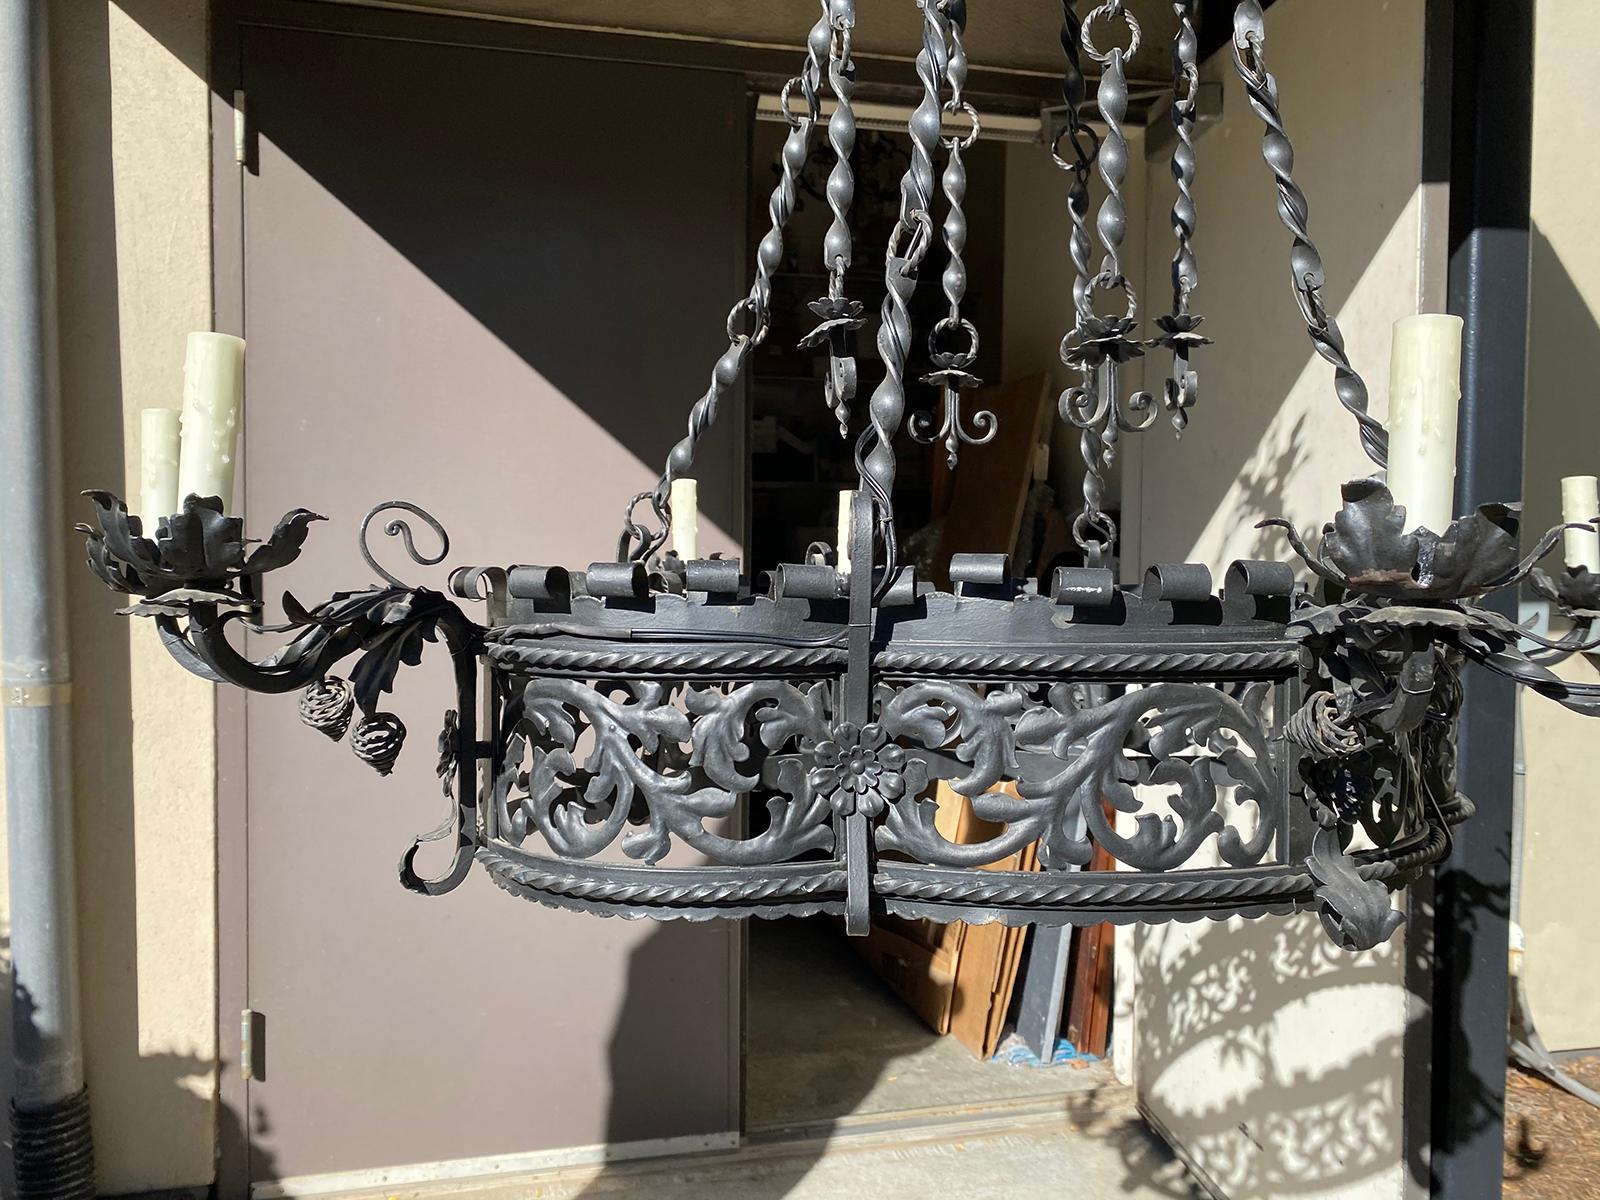 19th-Early 20th Century Continental Wrought Iron Eight-Arm Chandelier For Sale 2